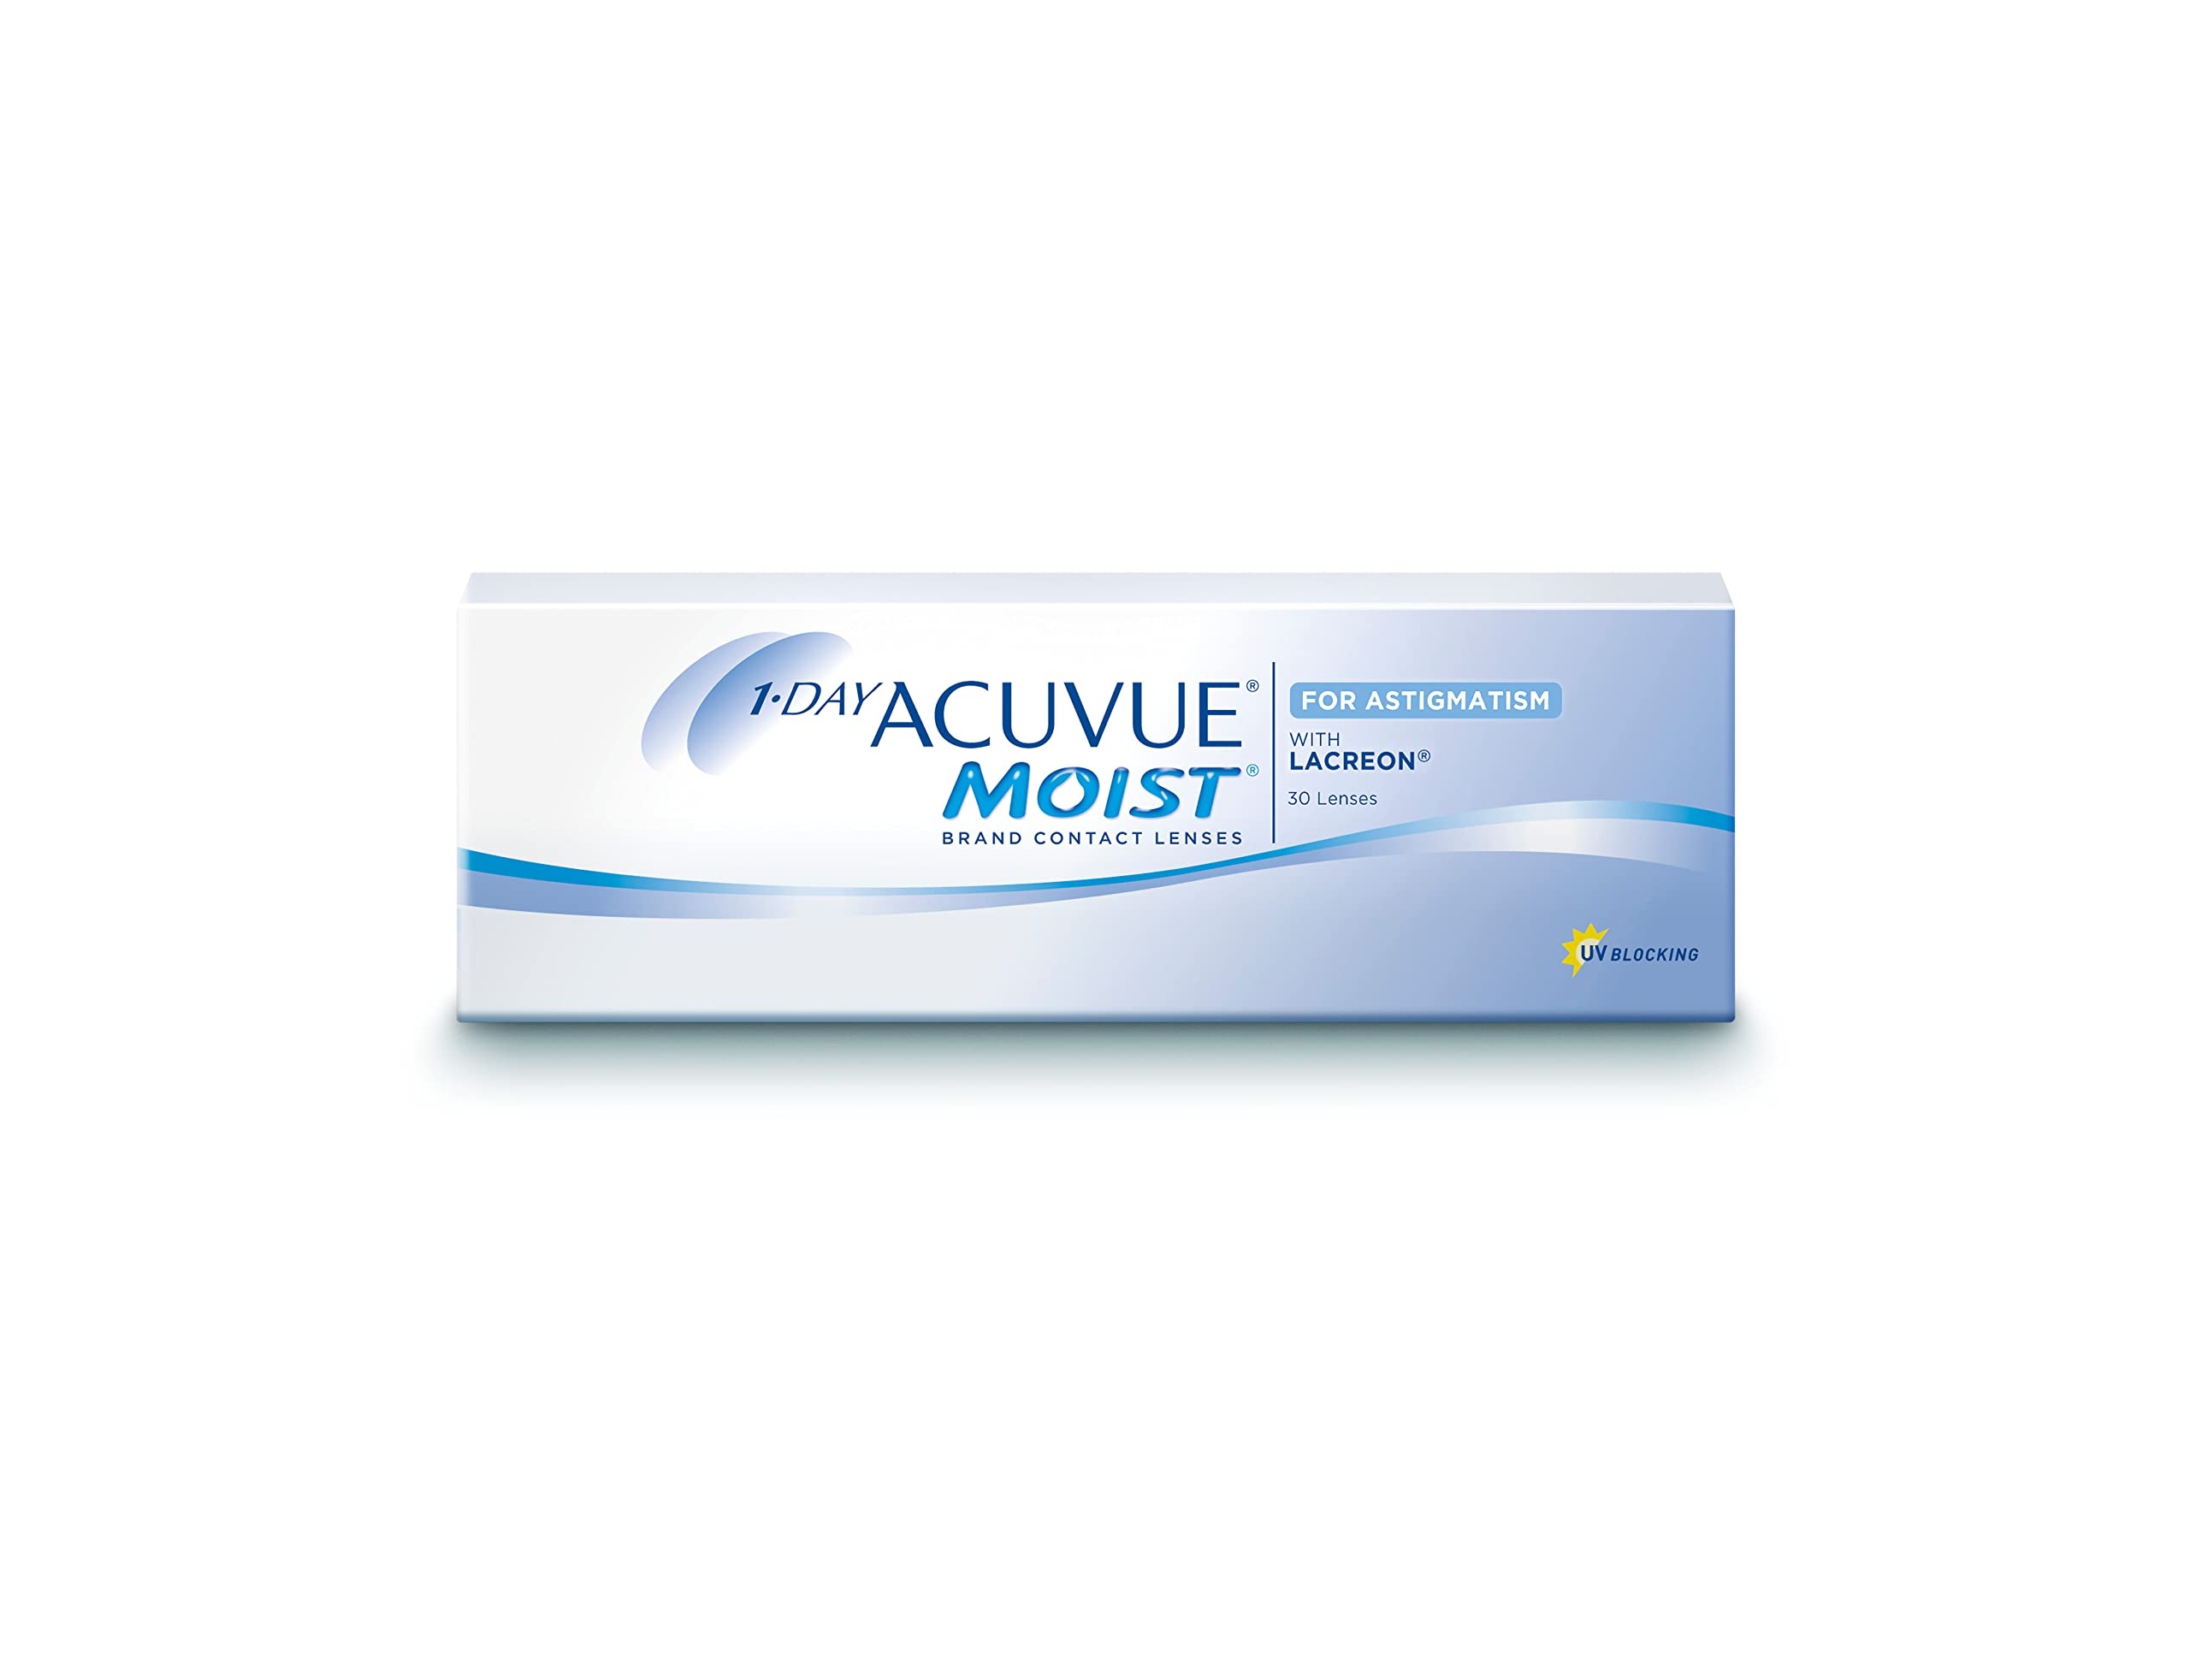 acuvue moist for astigmatism